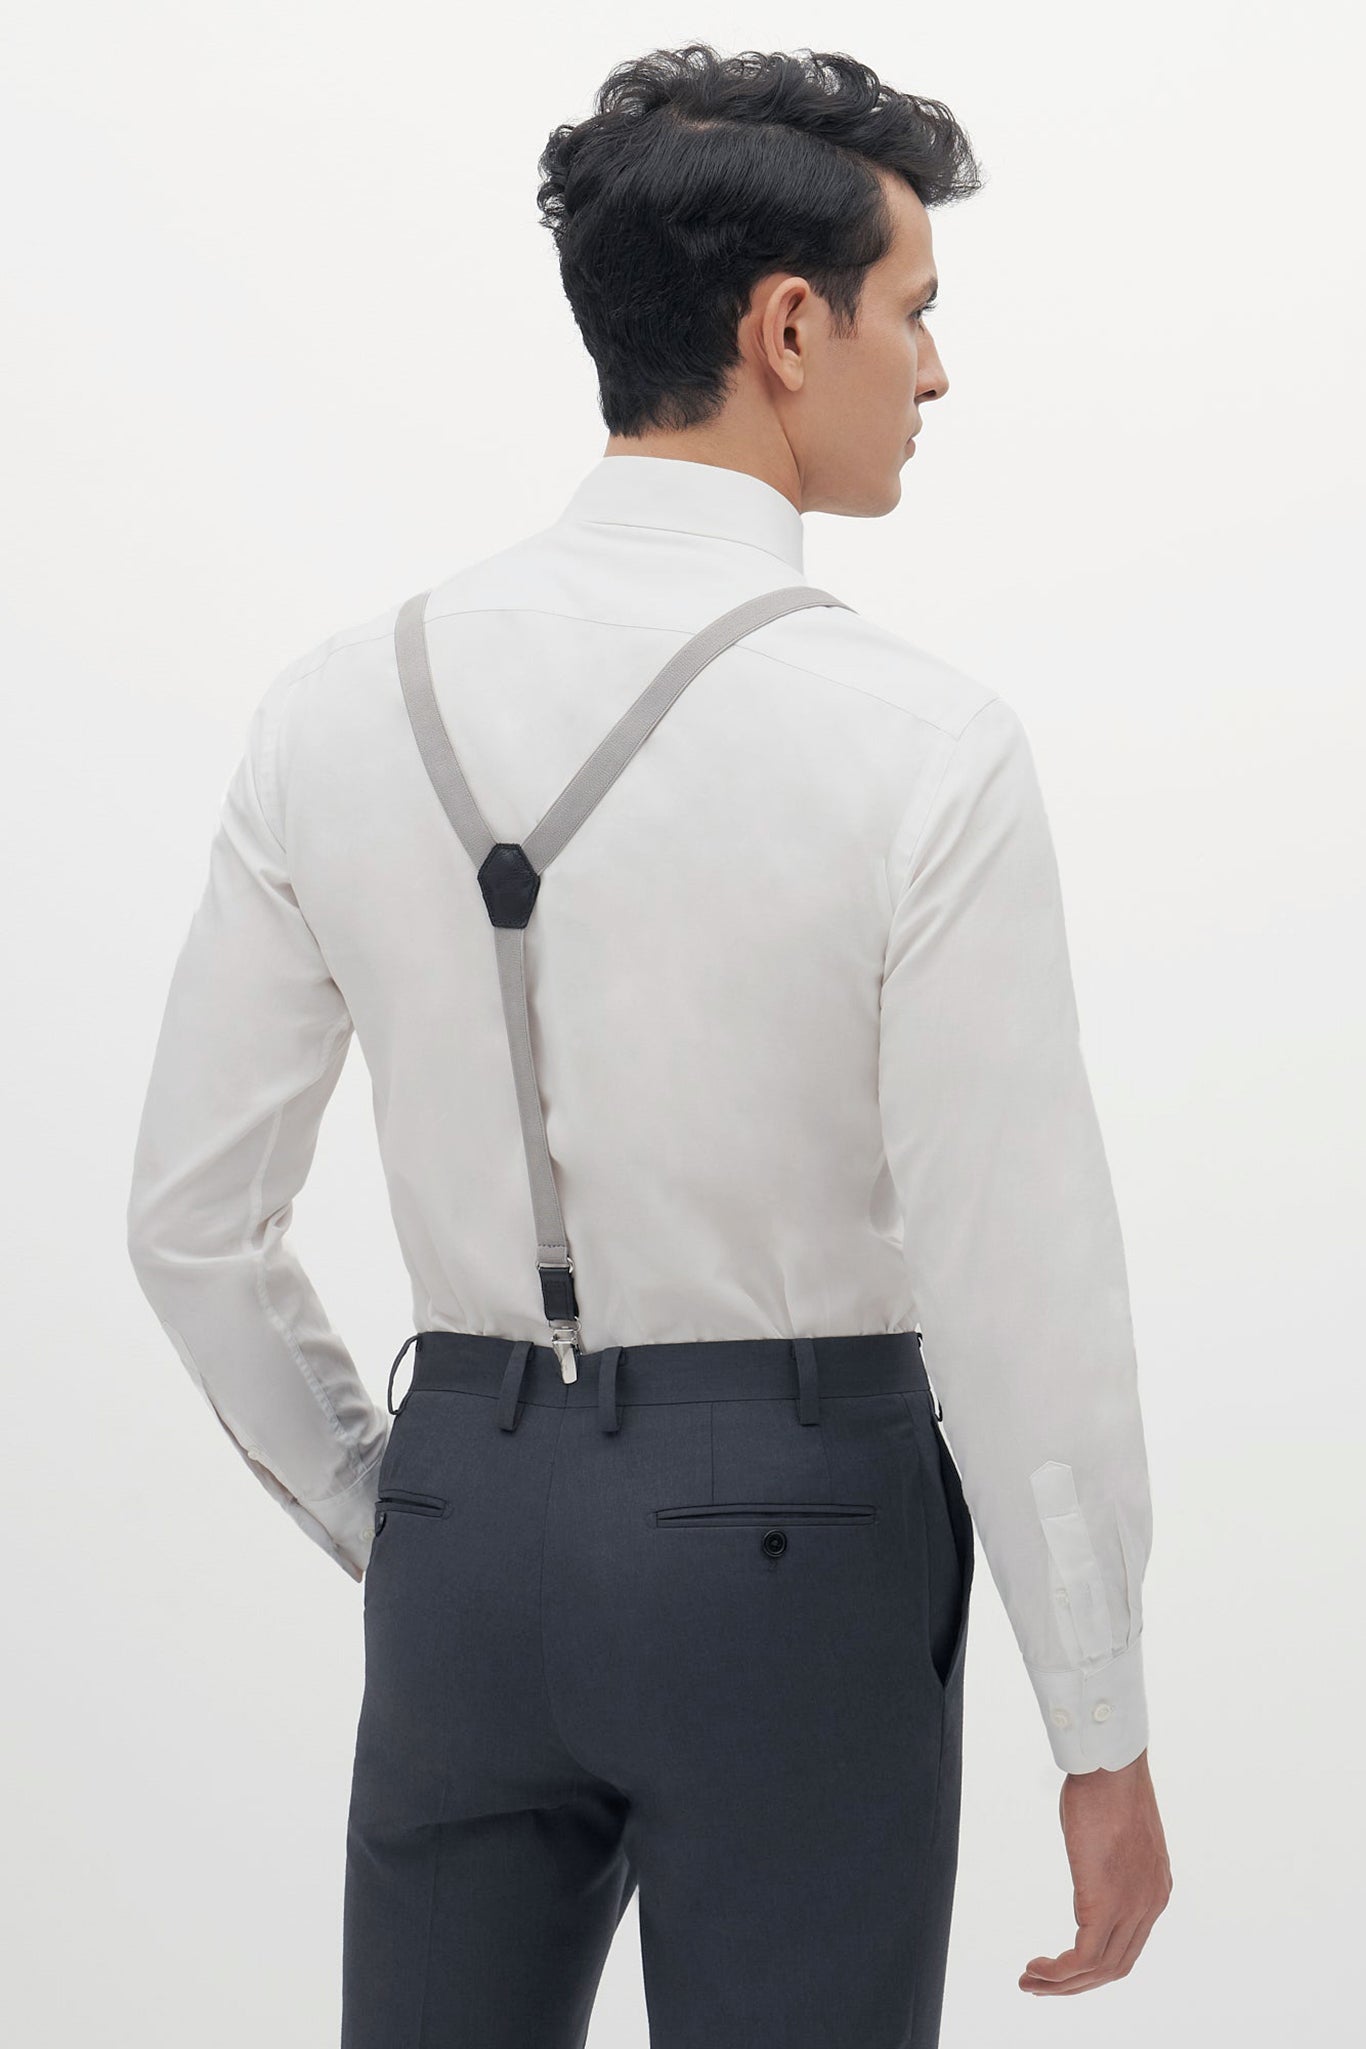 Grey Classic Suspenders by SuitShop, back view